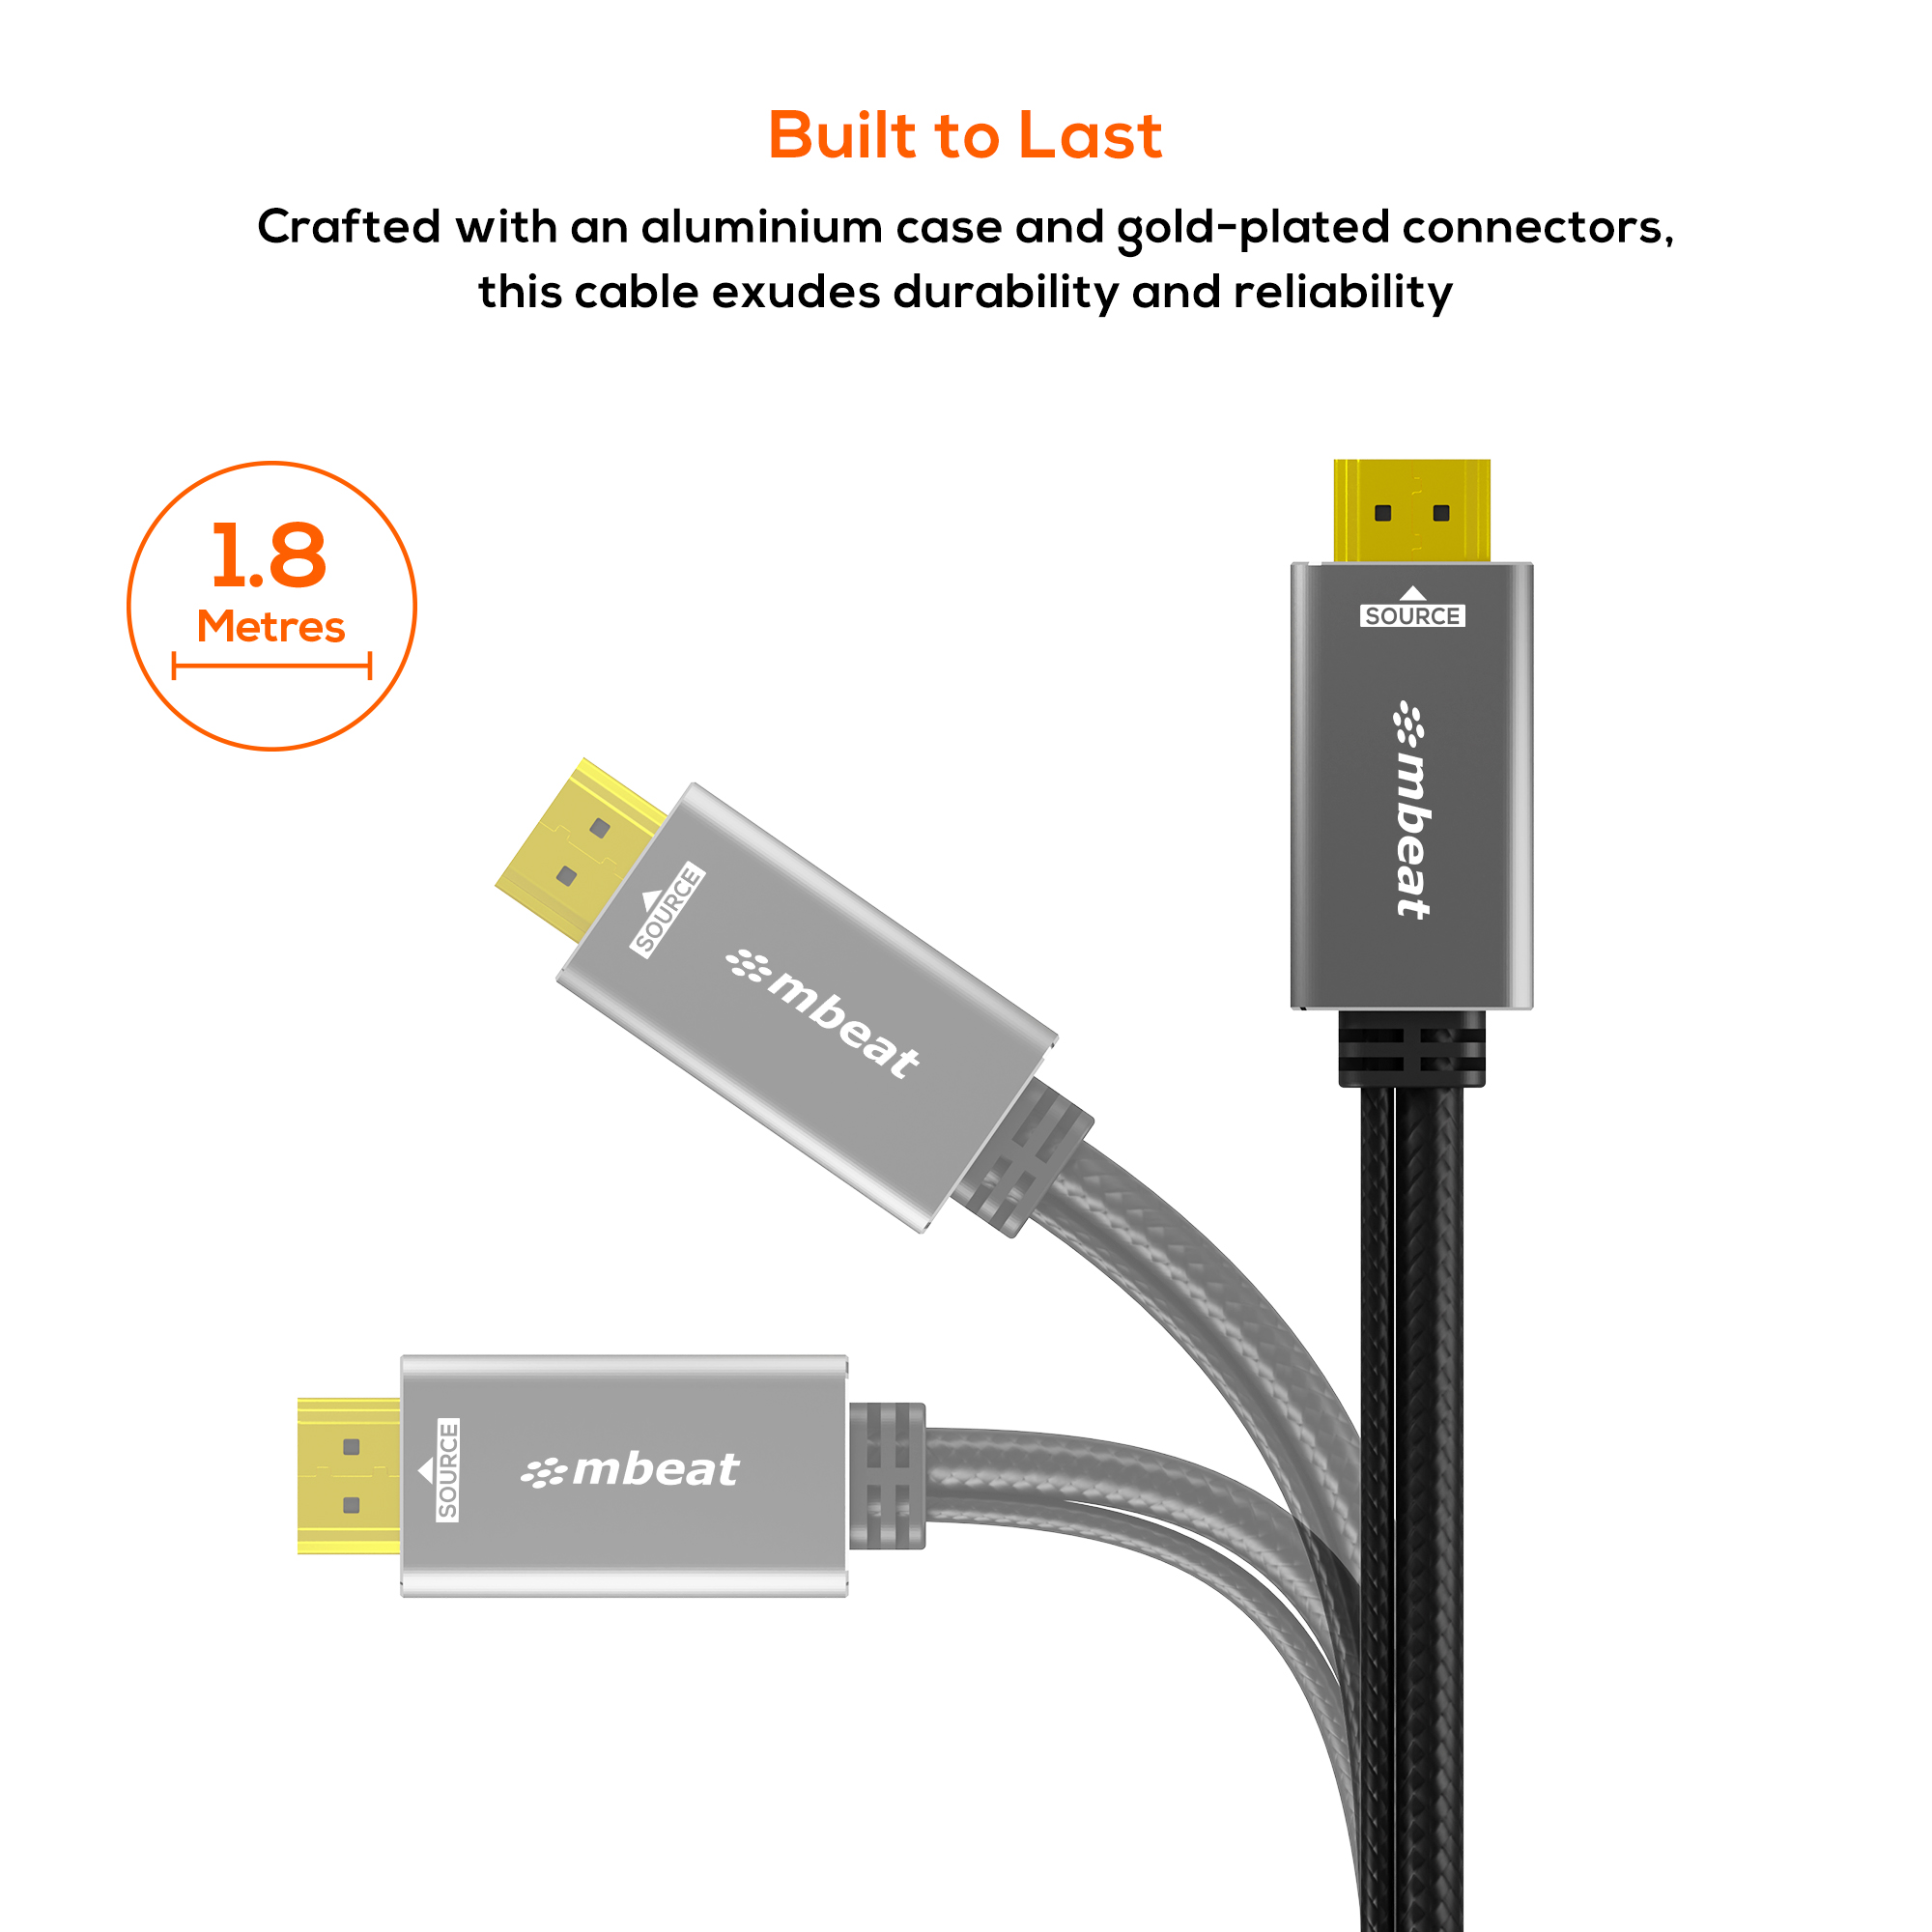 A large marketing image providing additional information about the product mbeat Tough Link HDMI to DisplayPort Cable with USB Power - 1.8m - Additional alt info not provided